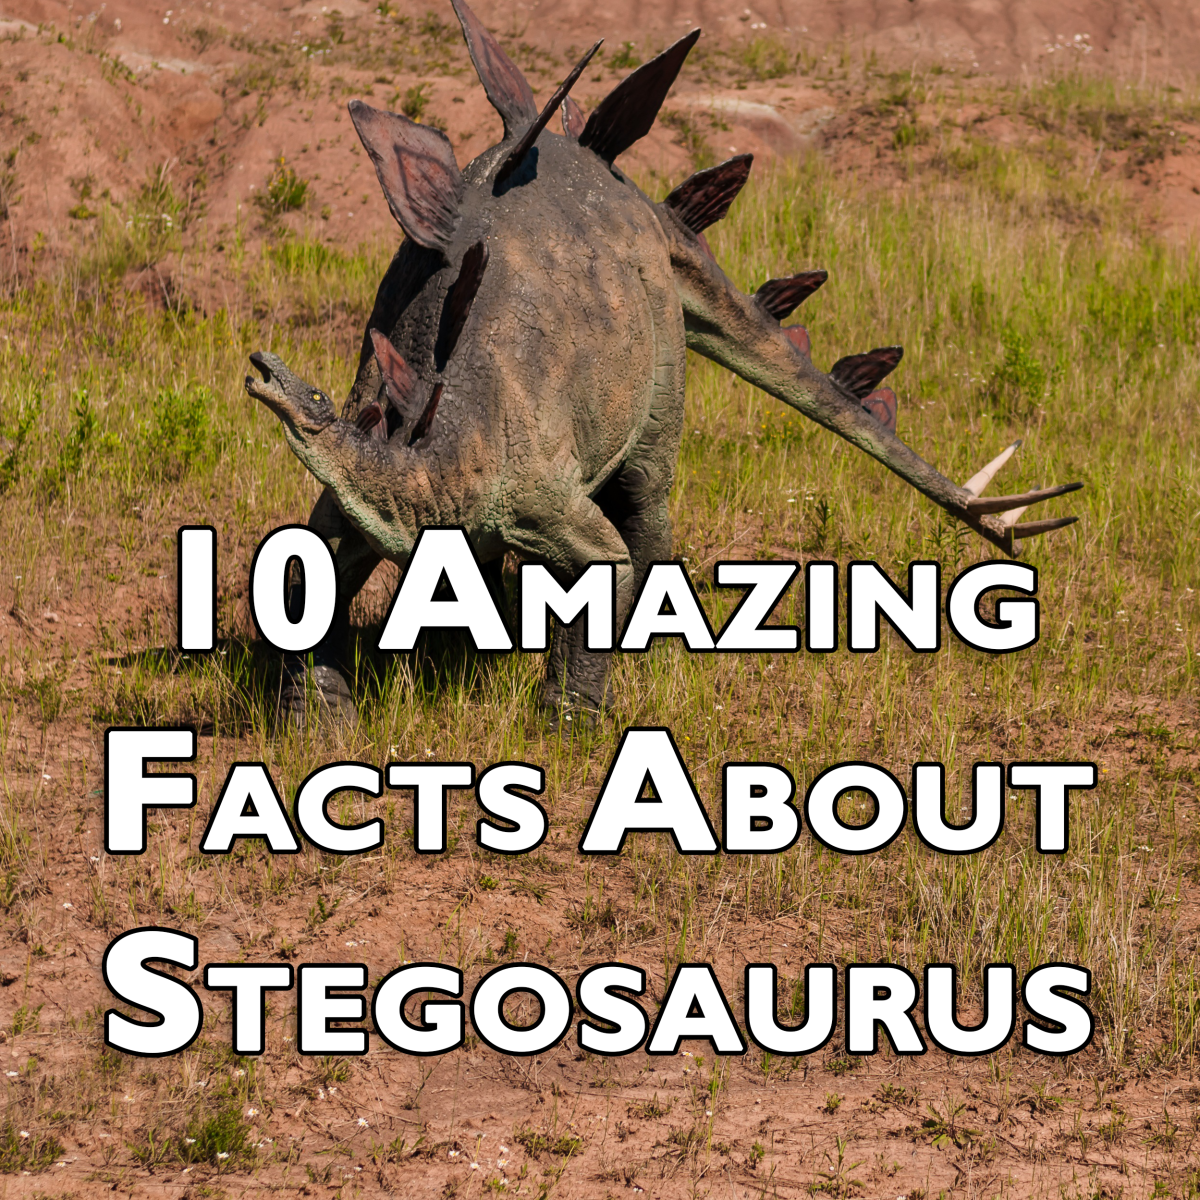 10 Amazing Facts About Stegosaurus: Ten Things You Probably Didn’t Know About Stegosaurus